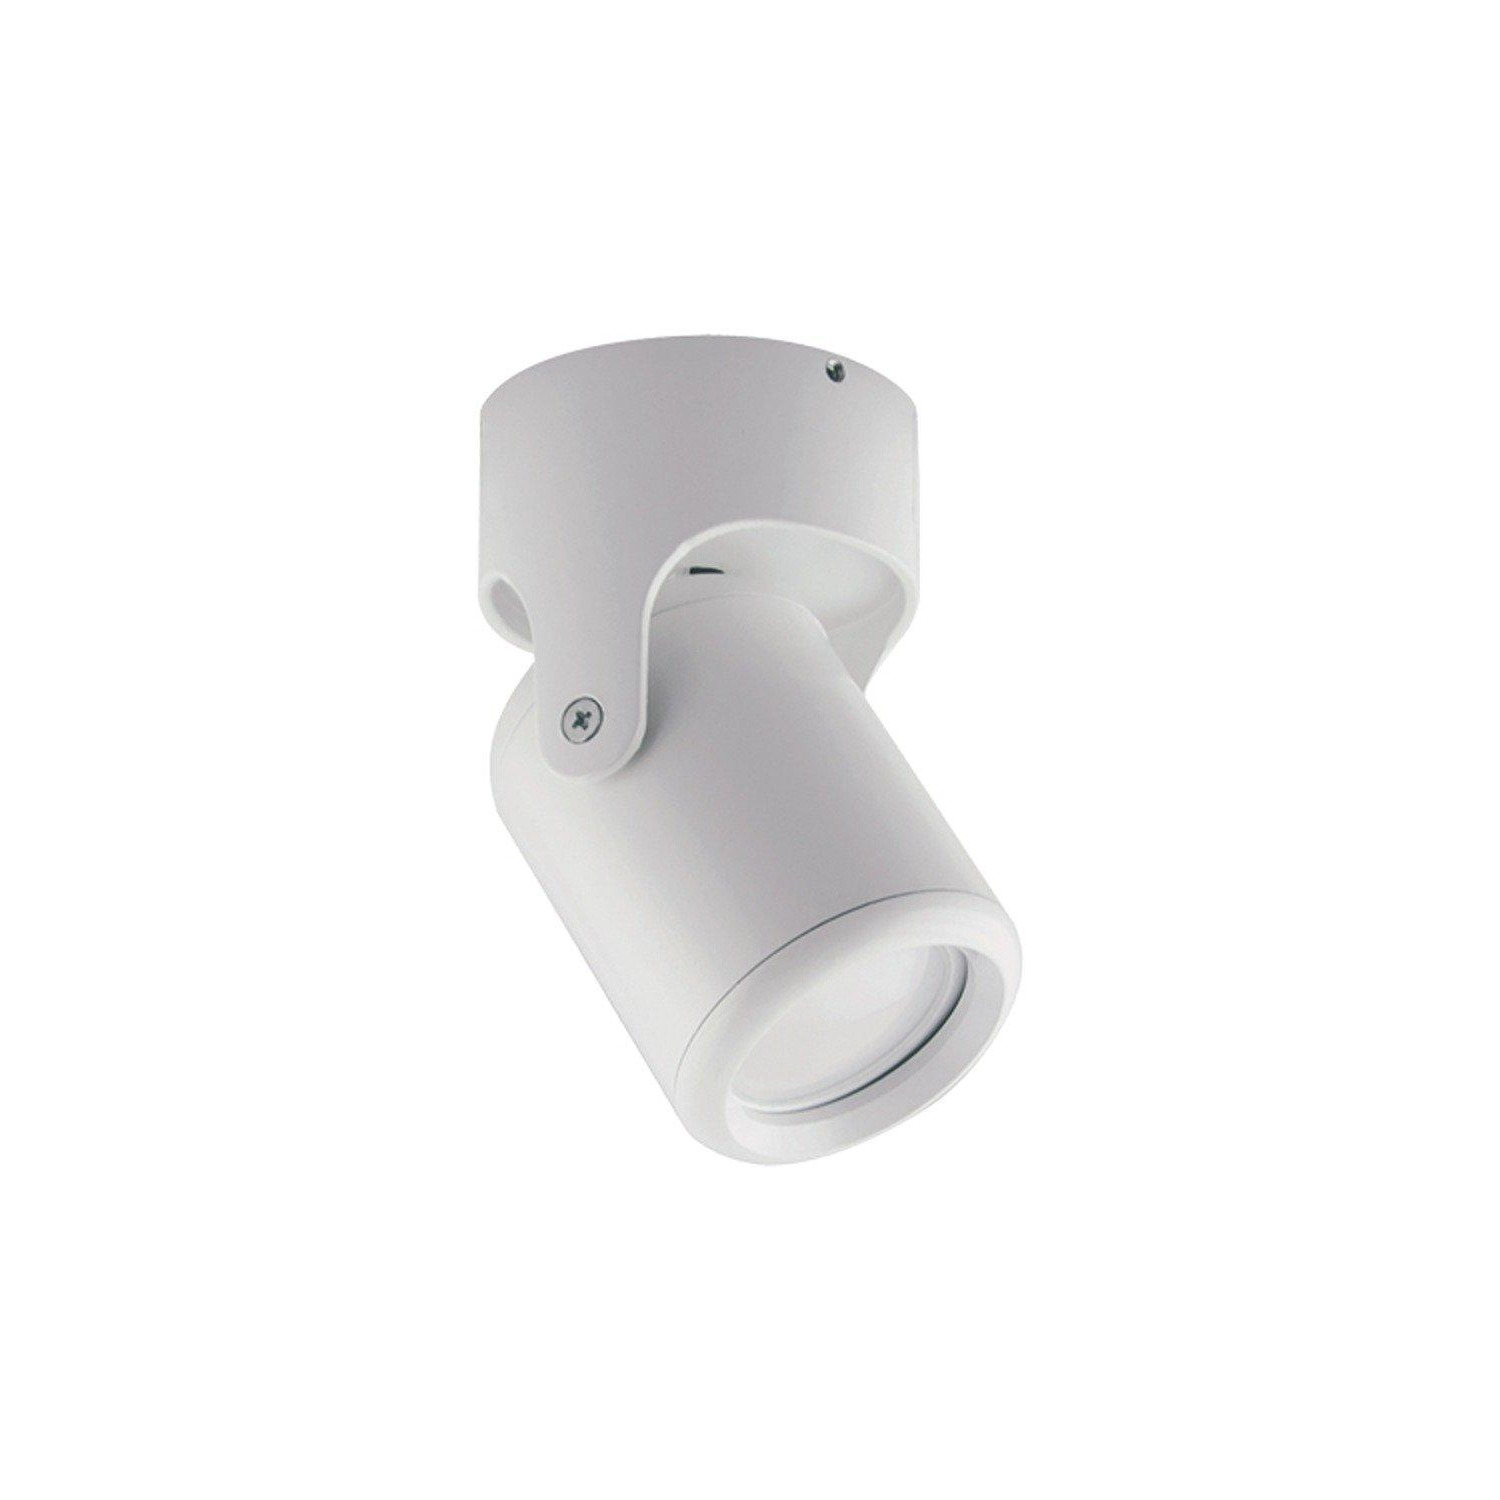 'Fran' White GU10 Ceiling Wall Spot Light With Adjustable Head - image 1